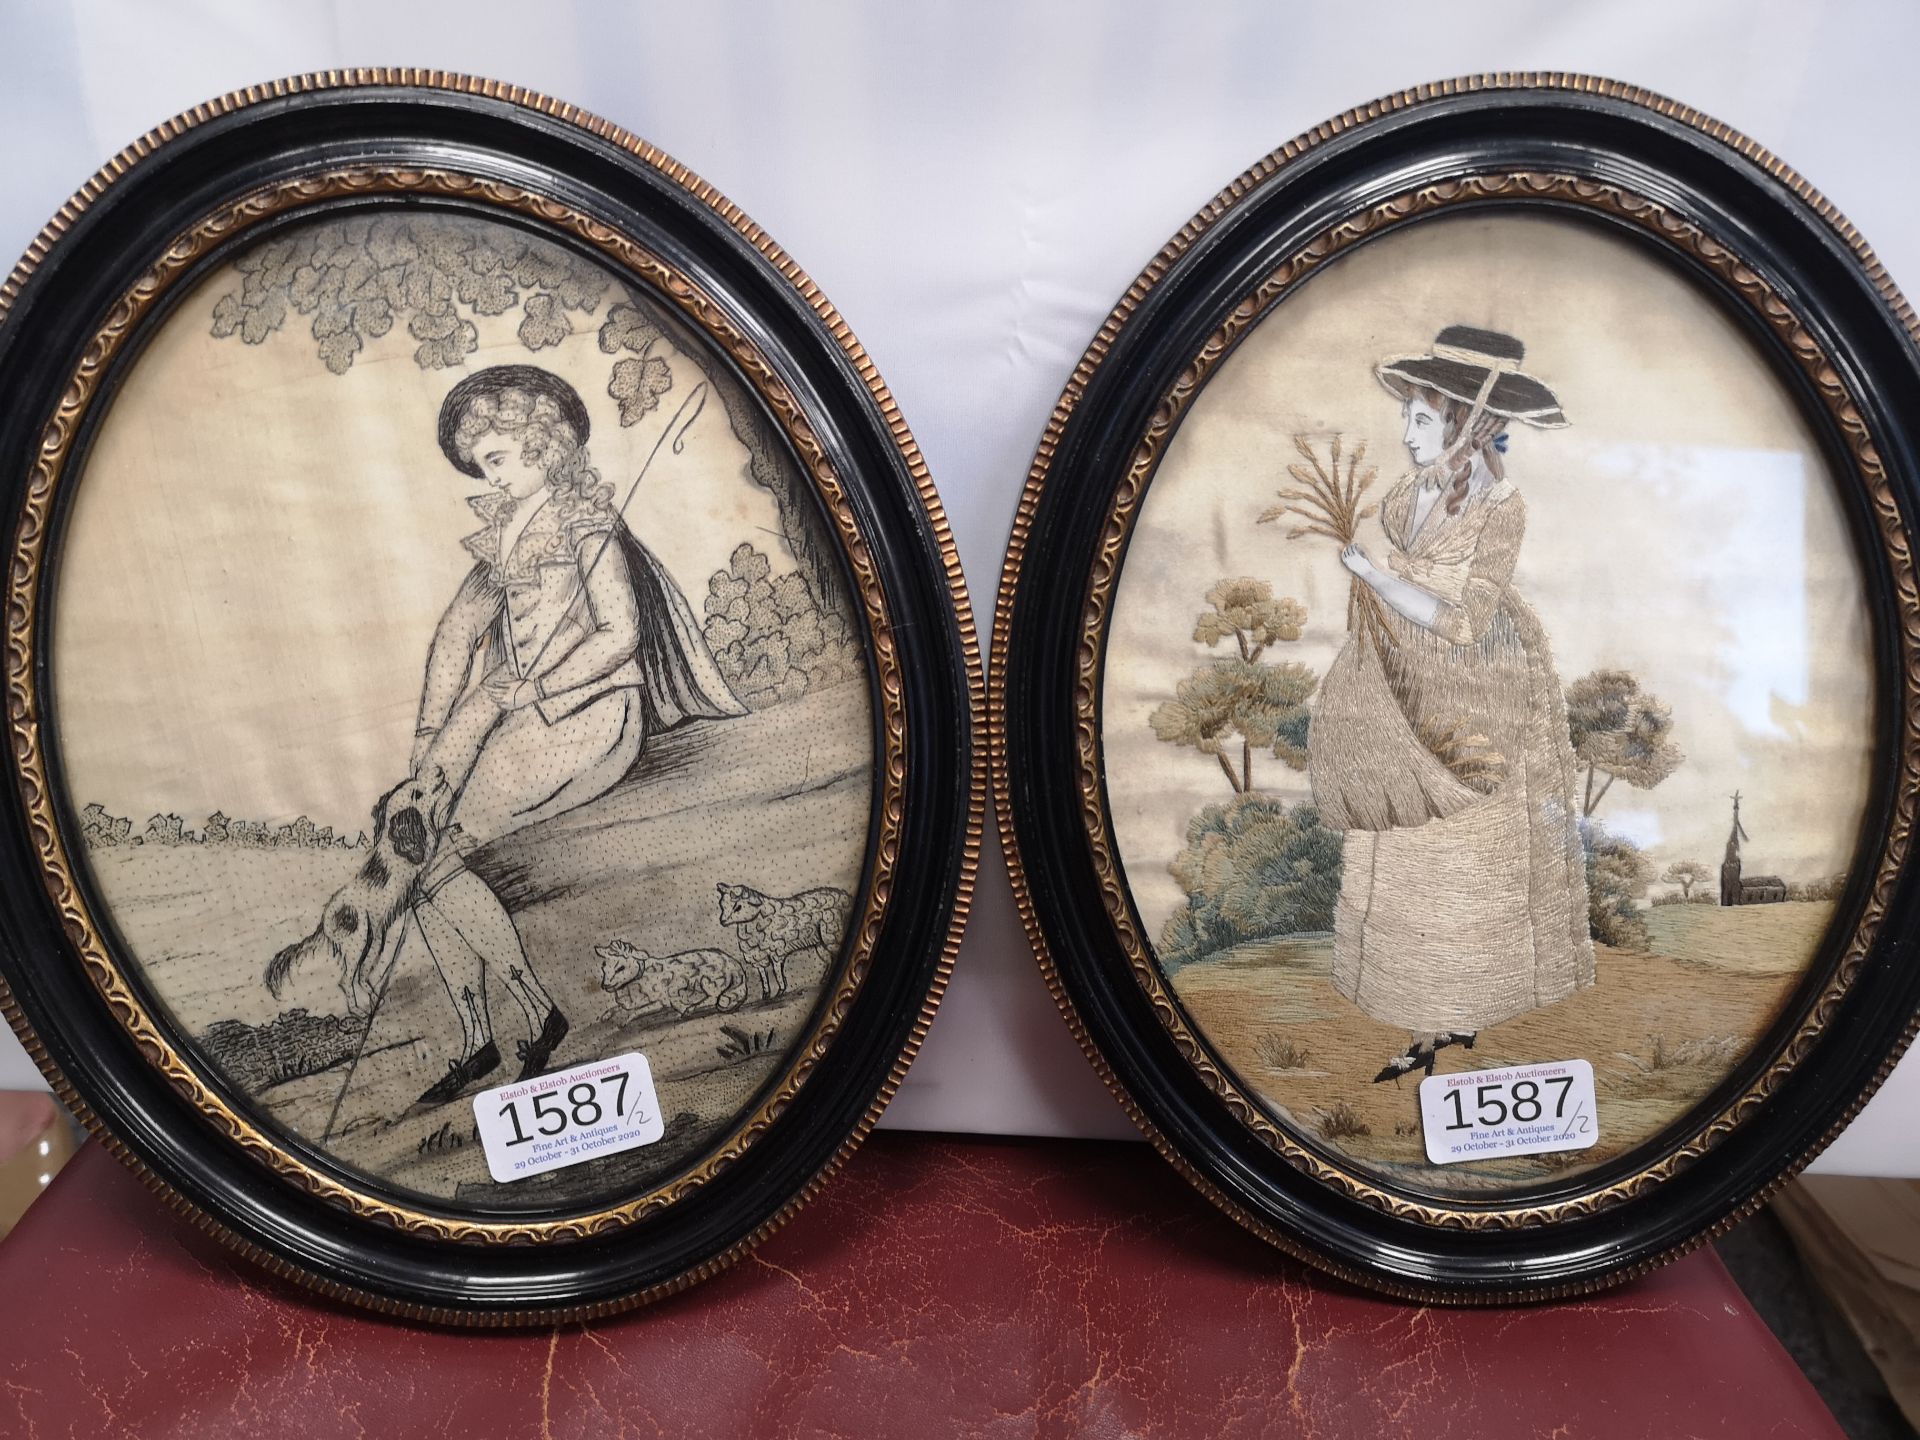 A PAIR OF EARLY 18TH CENTURY SILKWORK PICTURES, c. 1740, one depicting a shepherd boy with dog and